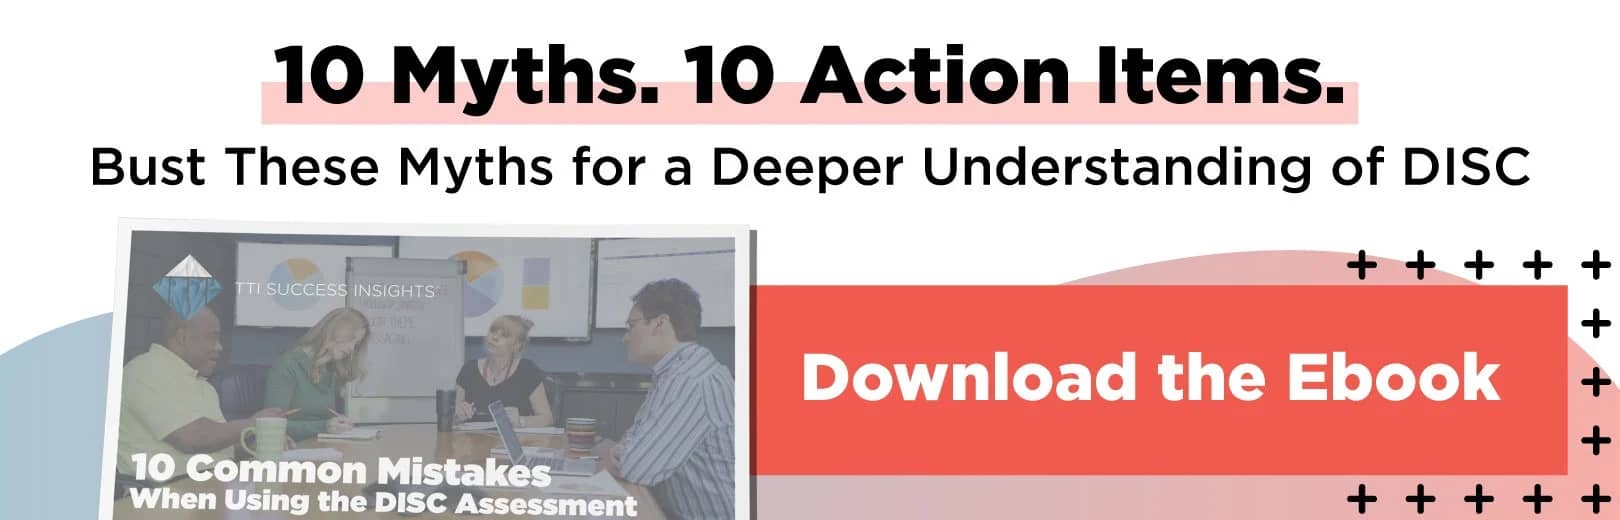 10 Myths. 10 Action Items. Bust These Myths for a Deeper Understanding of DISC. Download the Ebook